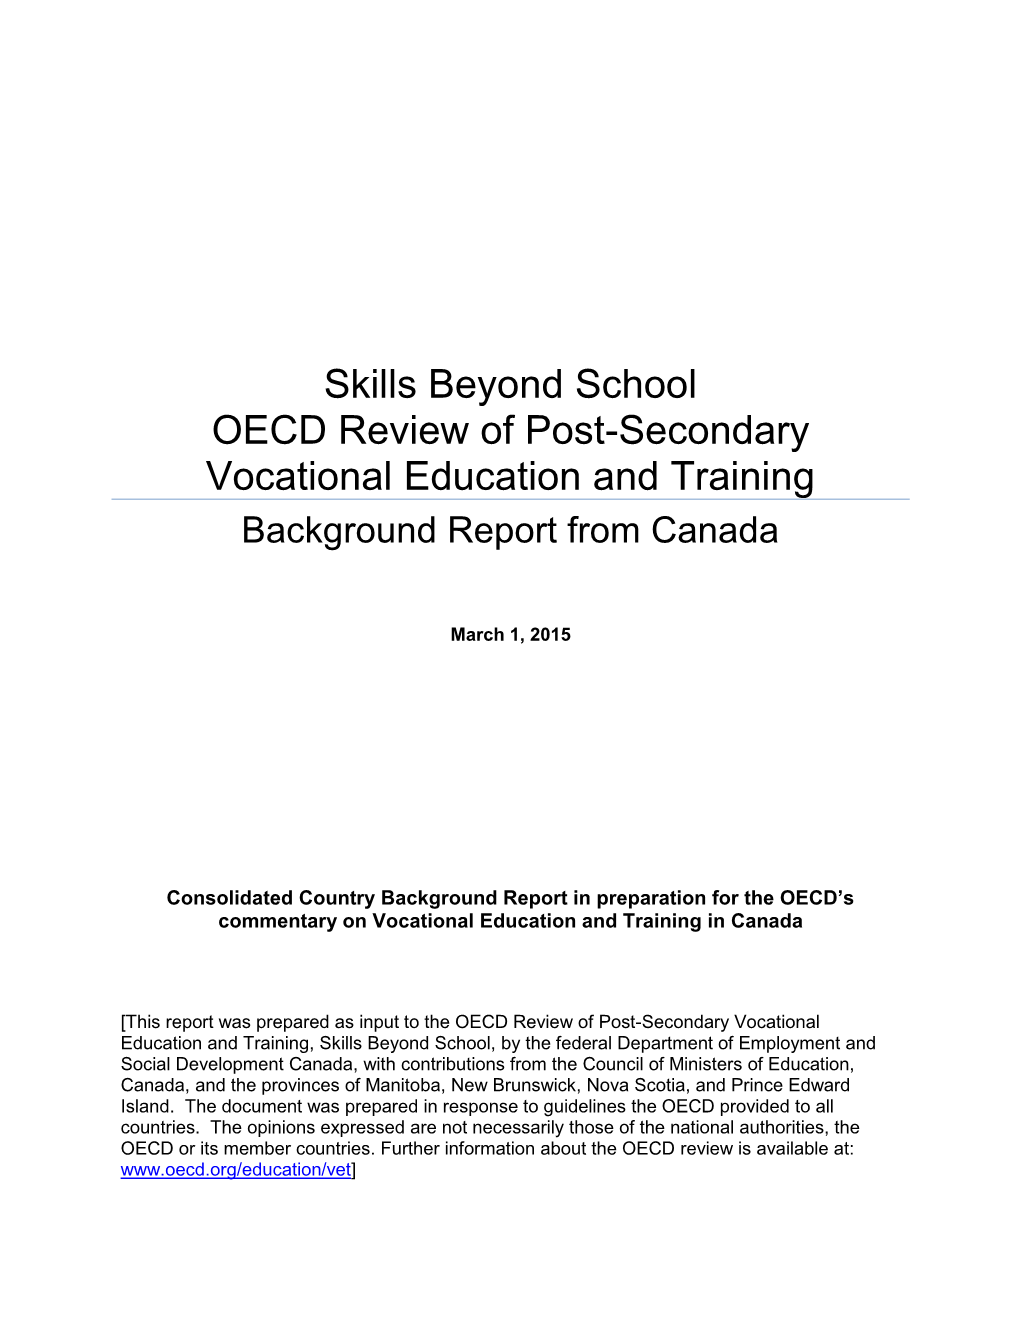 Skills Beyond School OECD Review of Postsecondary Vocational